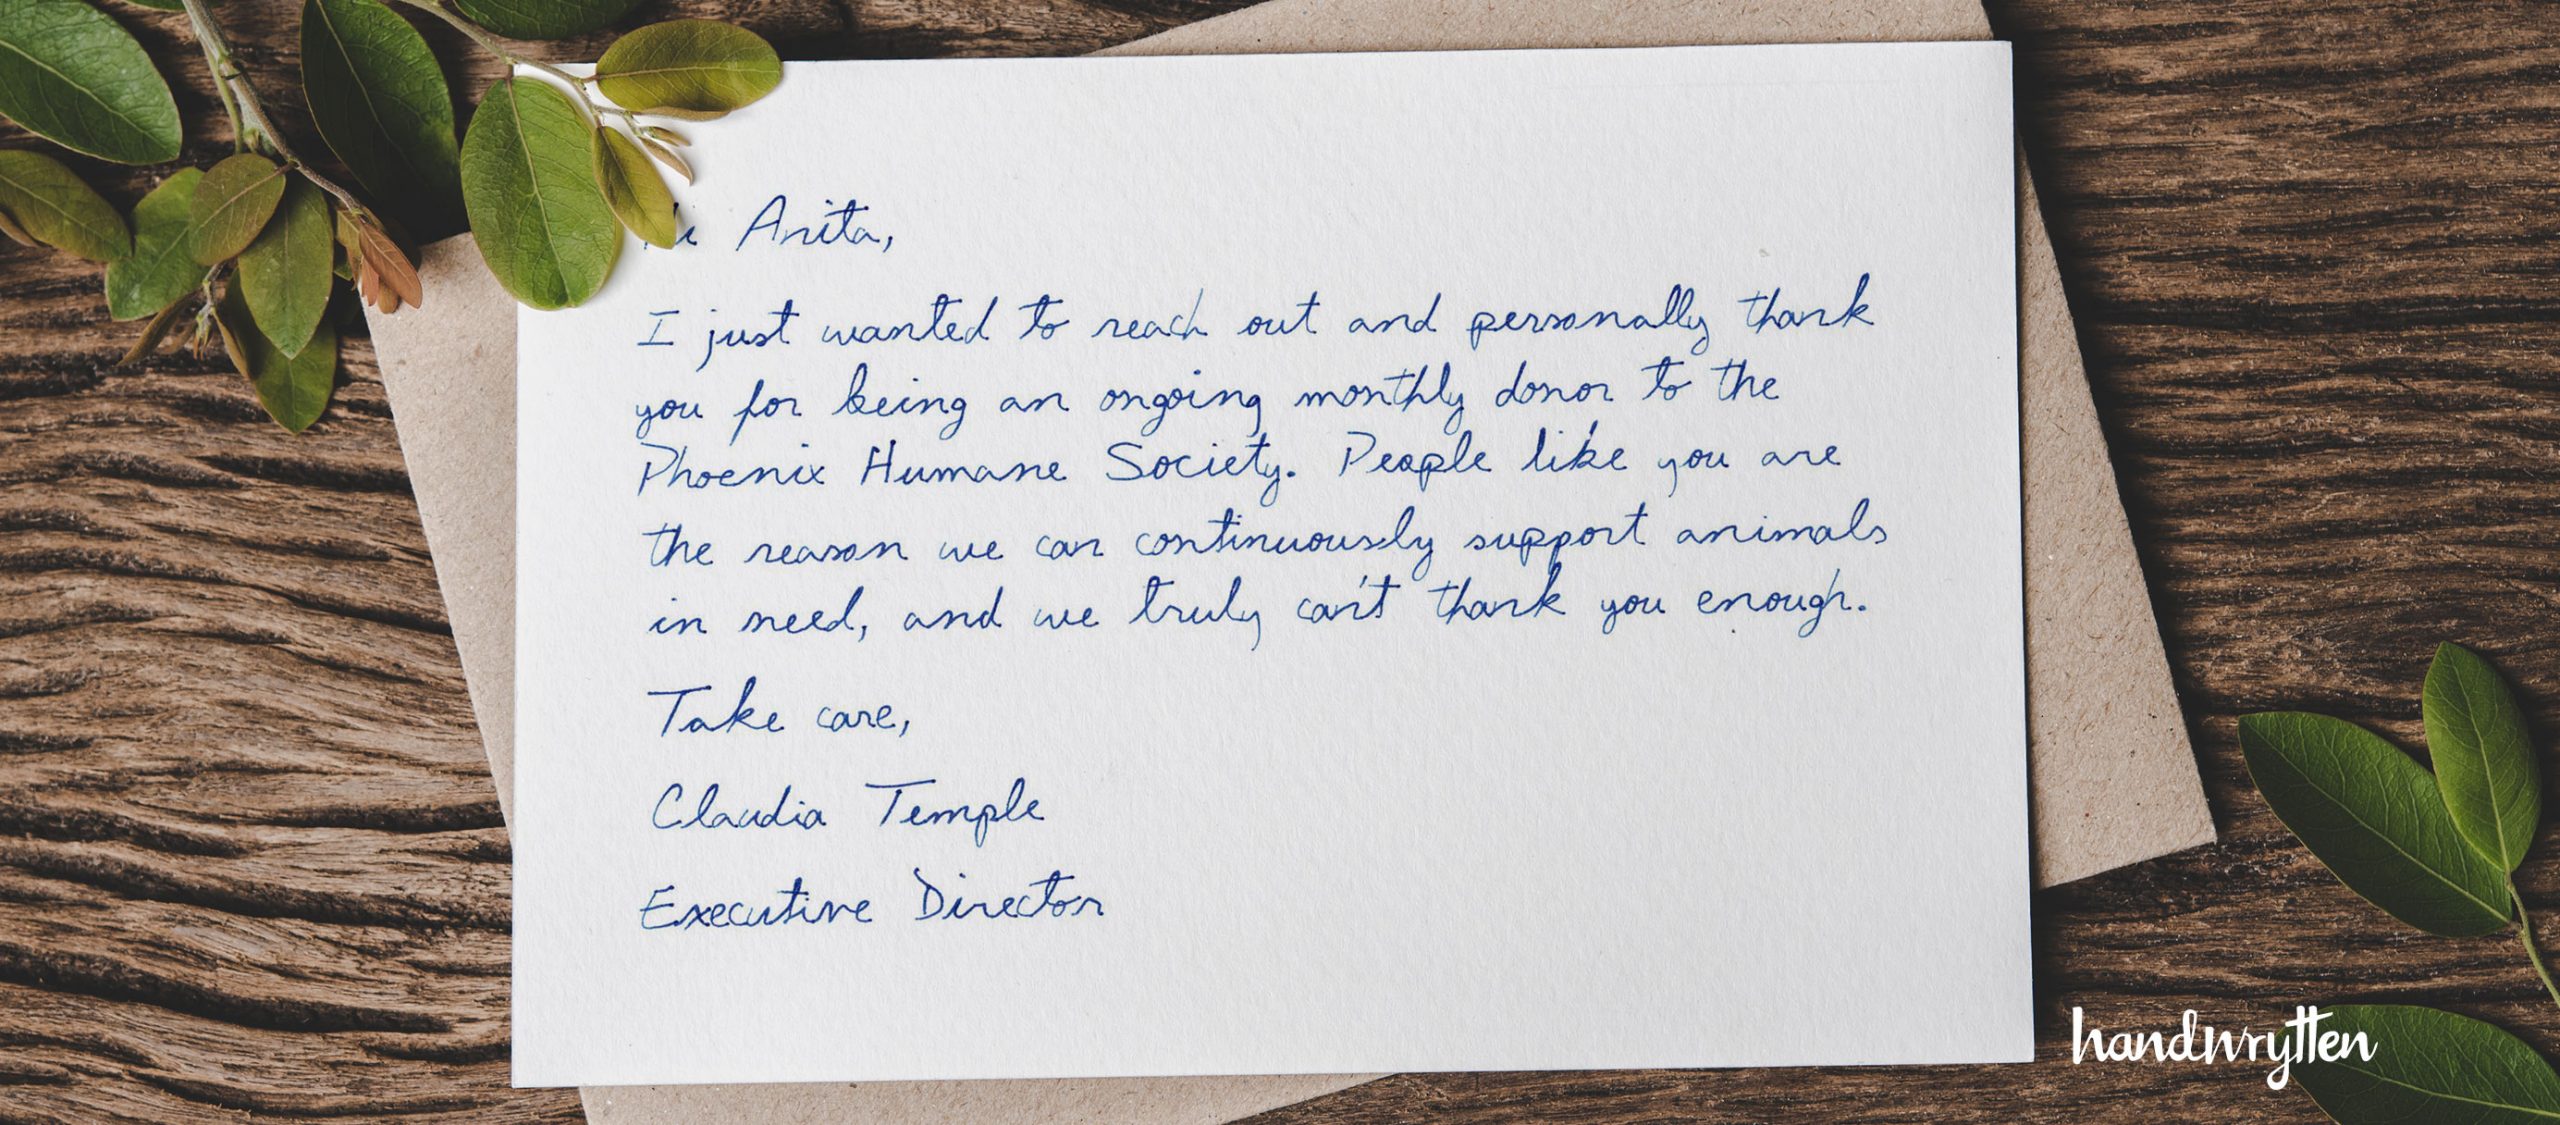 Top 10 Donation Thank-You Letter Examples - Handwrytten